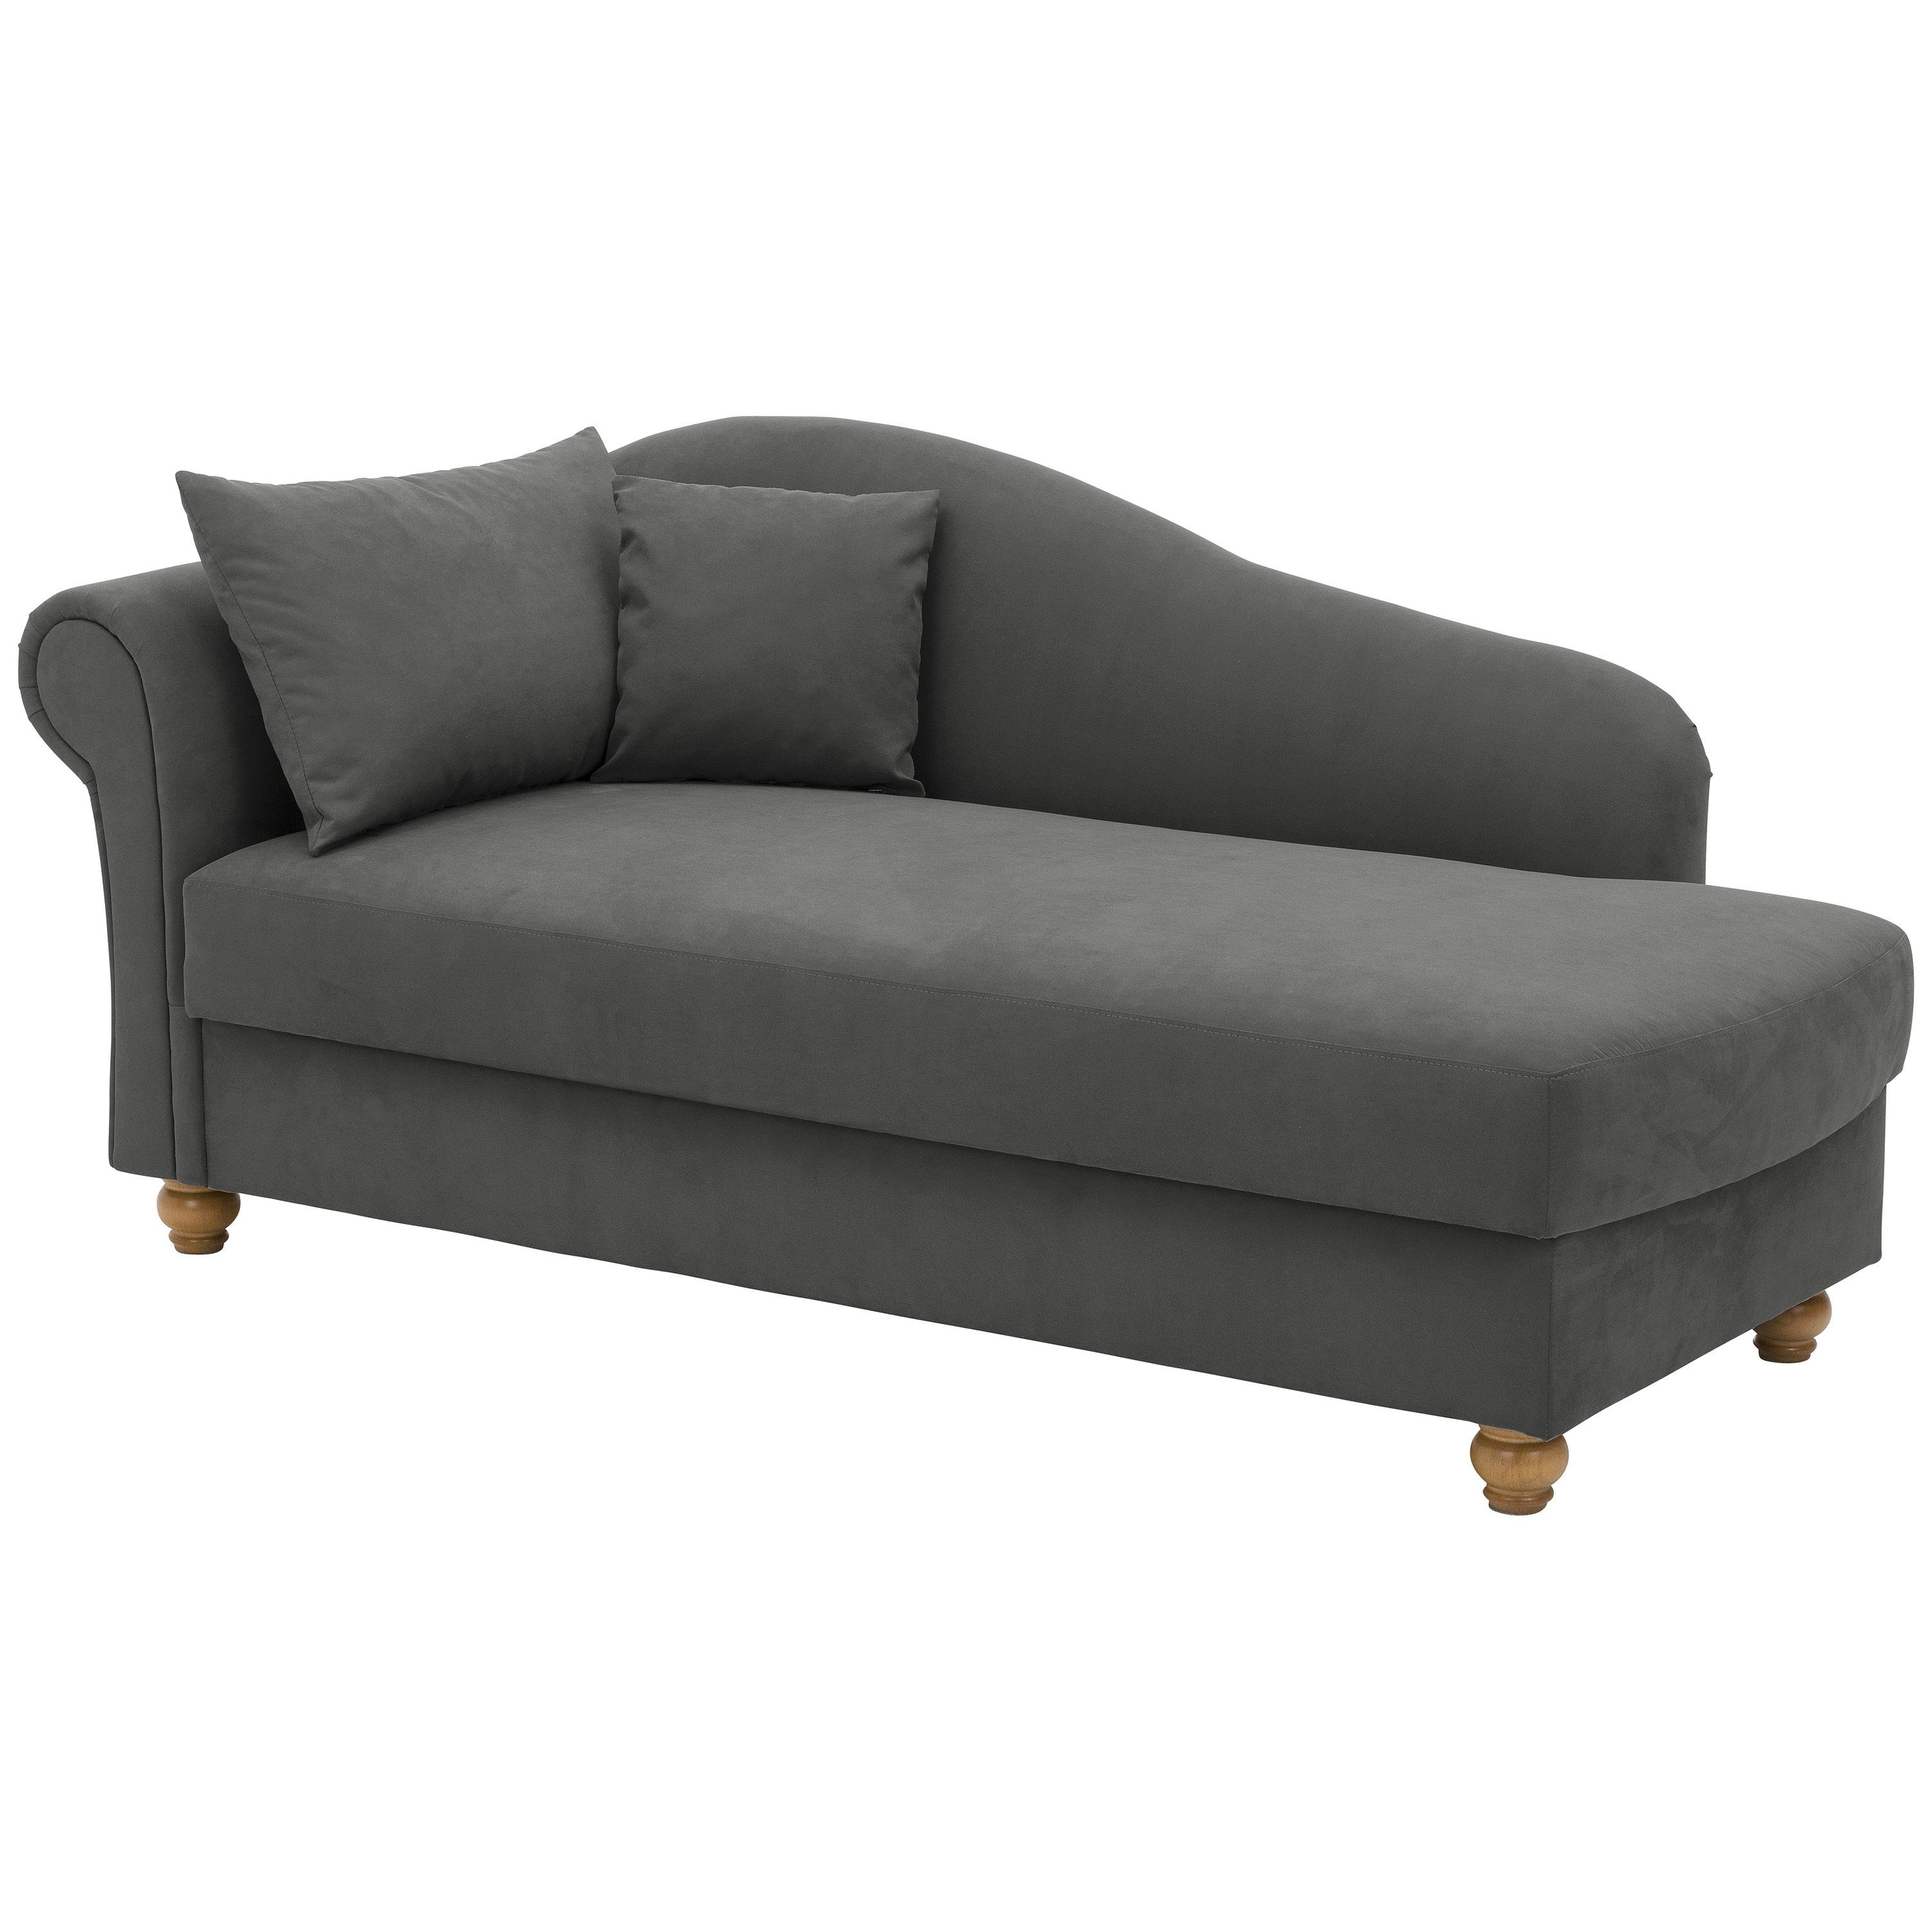 Max Winzer® Sofa Evelyn, Recamiere Armlehne links